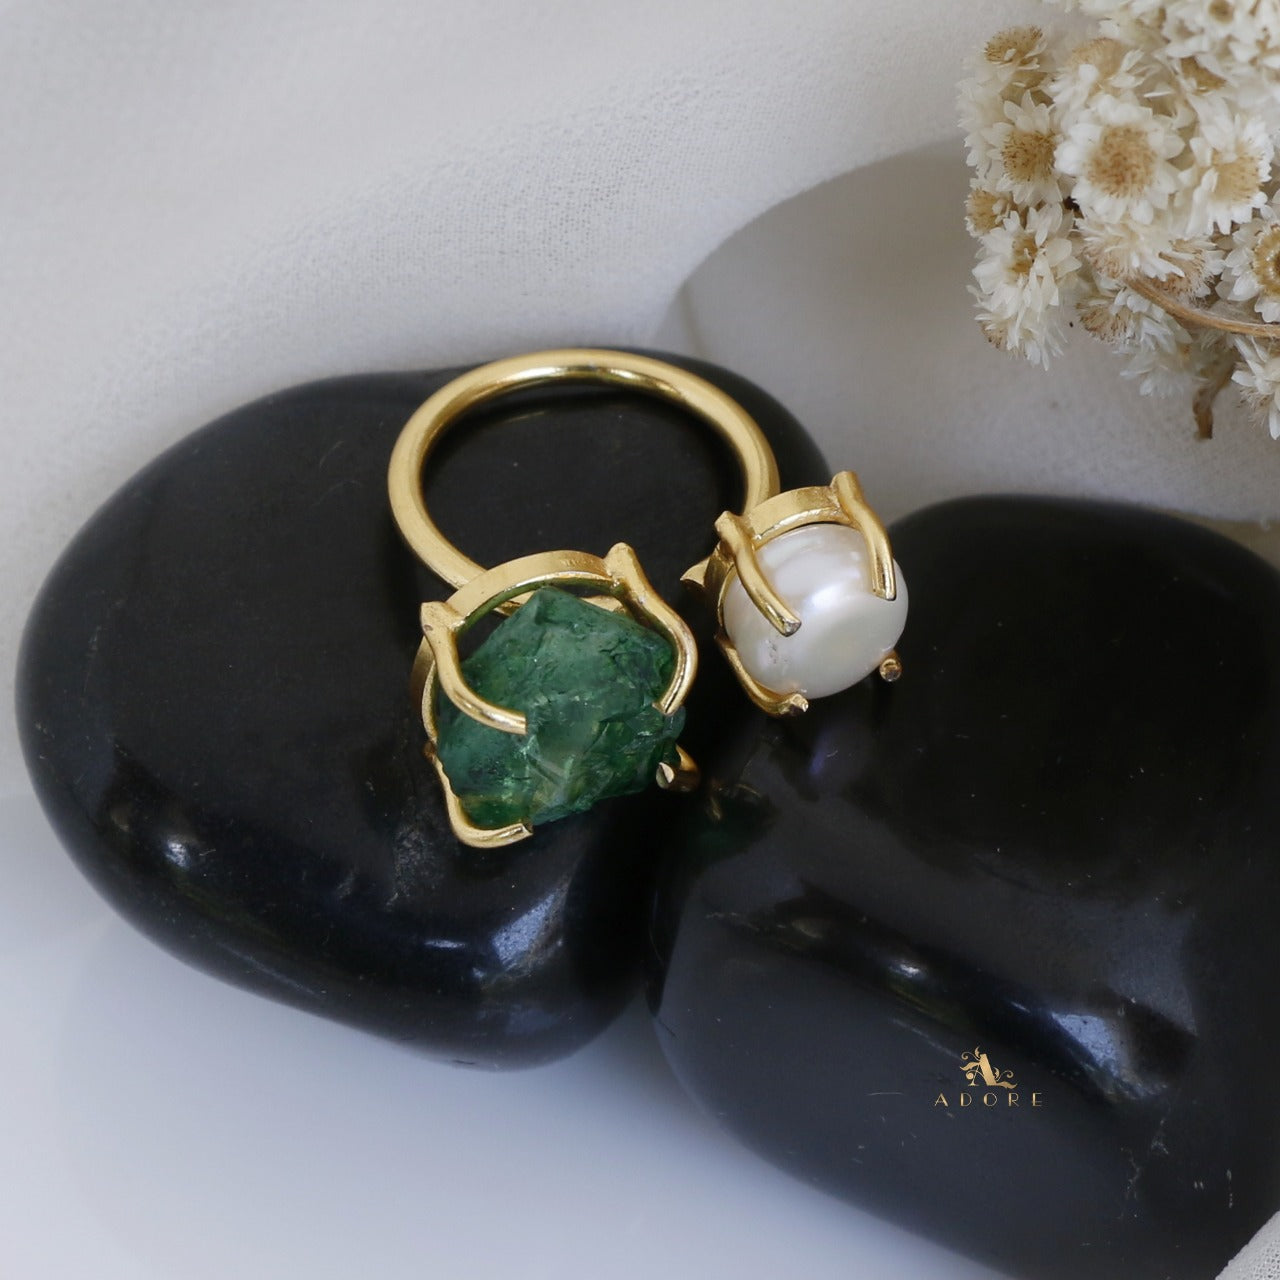 Buy the Hagit Gorali 925 Green Pearl Statement Ring 9.5g | GoodwillFinds